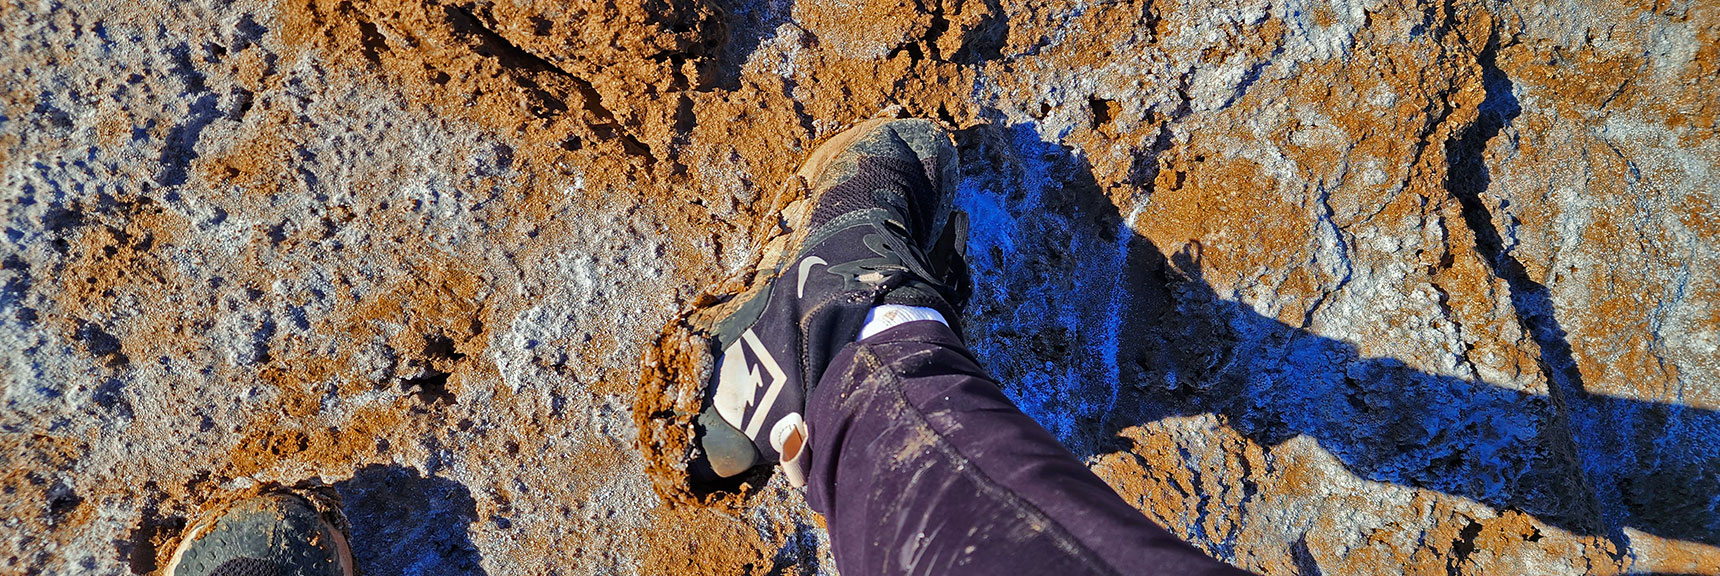 Mud Check! Shoes Gained a Couple Pounds Each. Mud Dries As Solid Clay | Death Valley Crossing | Death Valley National Park, California | David Smith | LasVegasAreaTrails.com